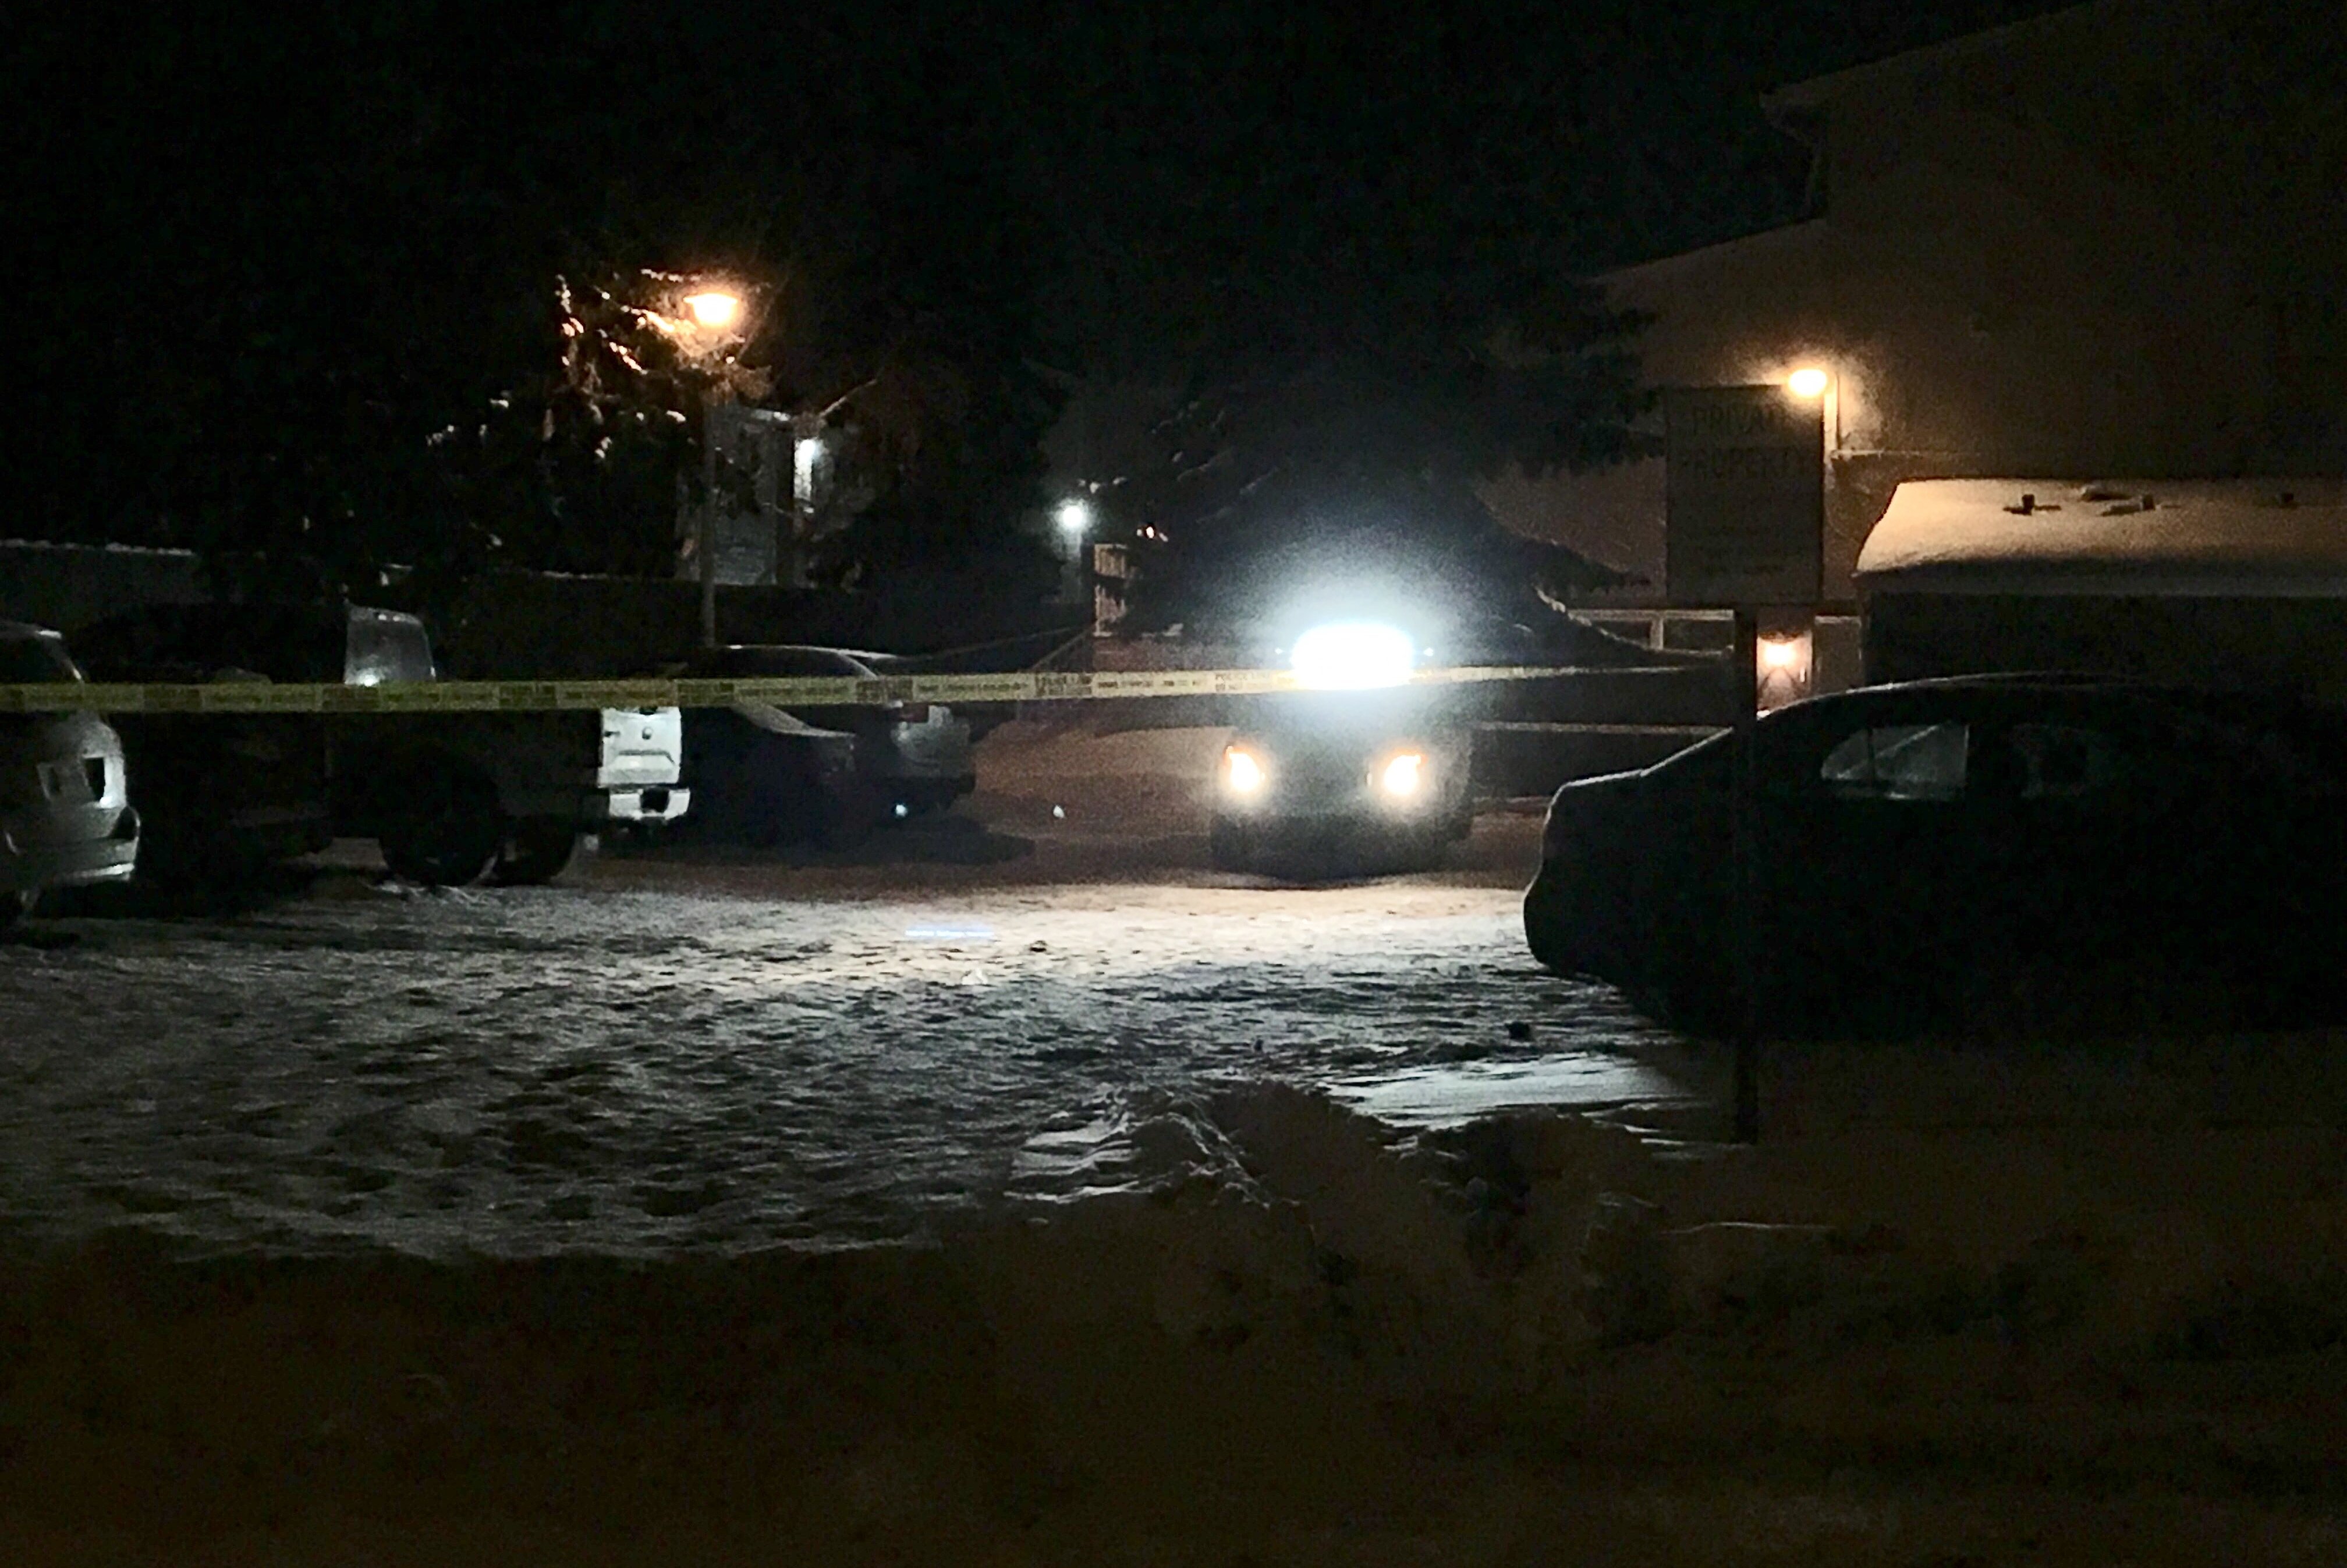 Edmonton police homicide investigators were called to a shooting near the Clareview Place townhouse complex (13570 38 St.) in northeast Edmonton Tuesday, Feb. 26, 2019.